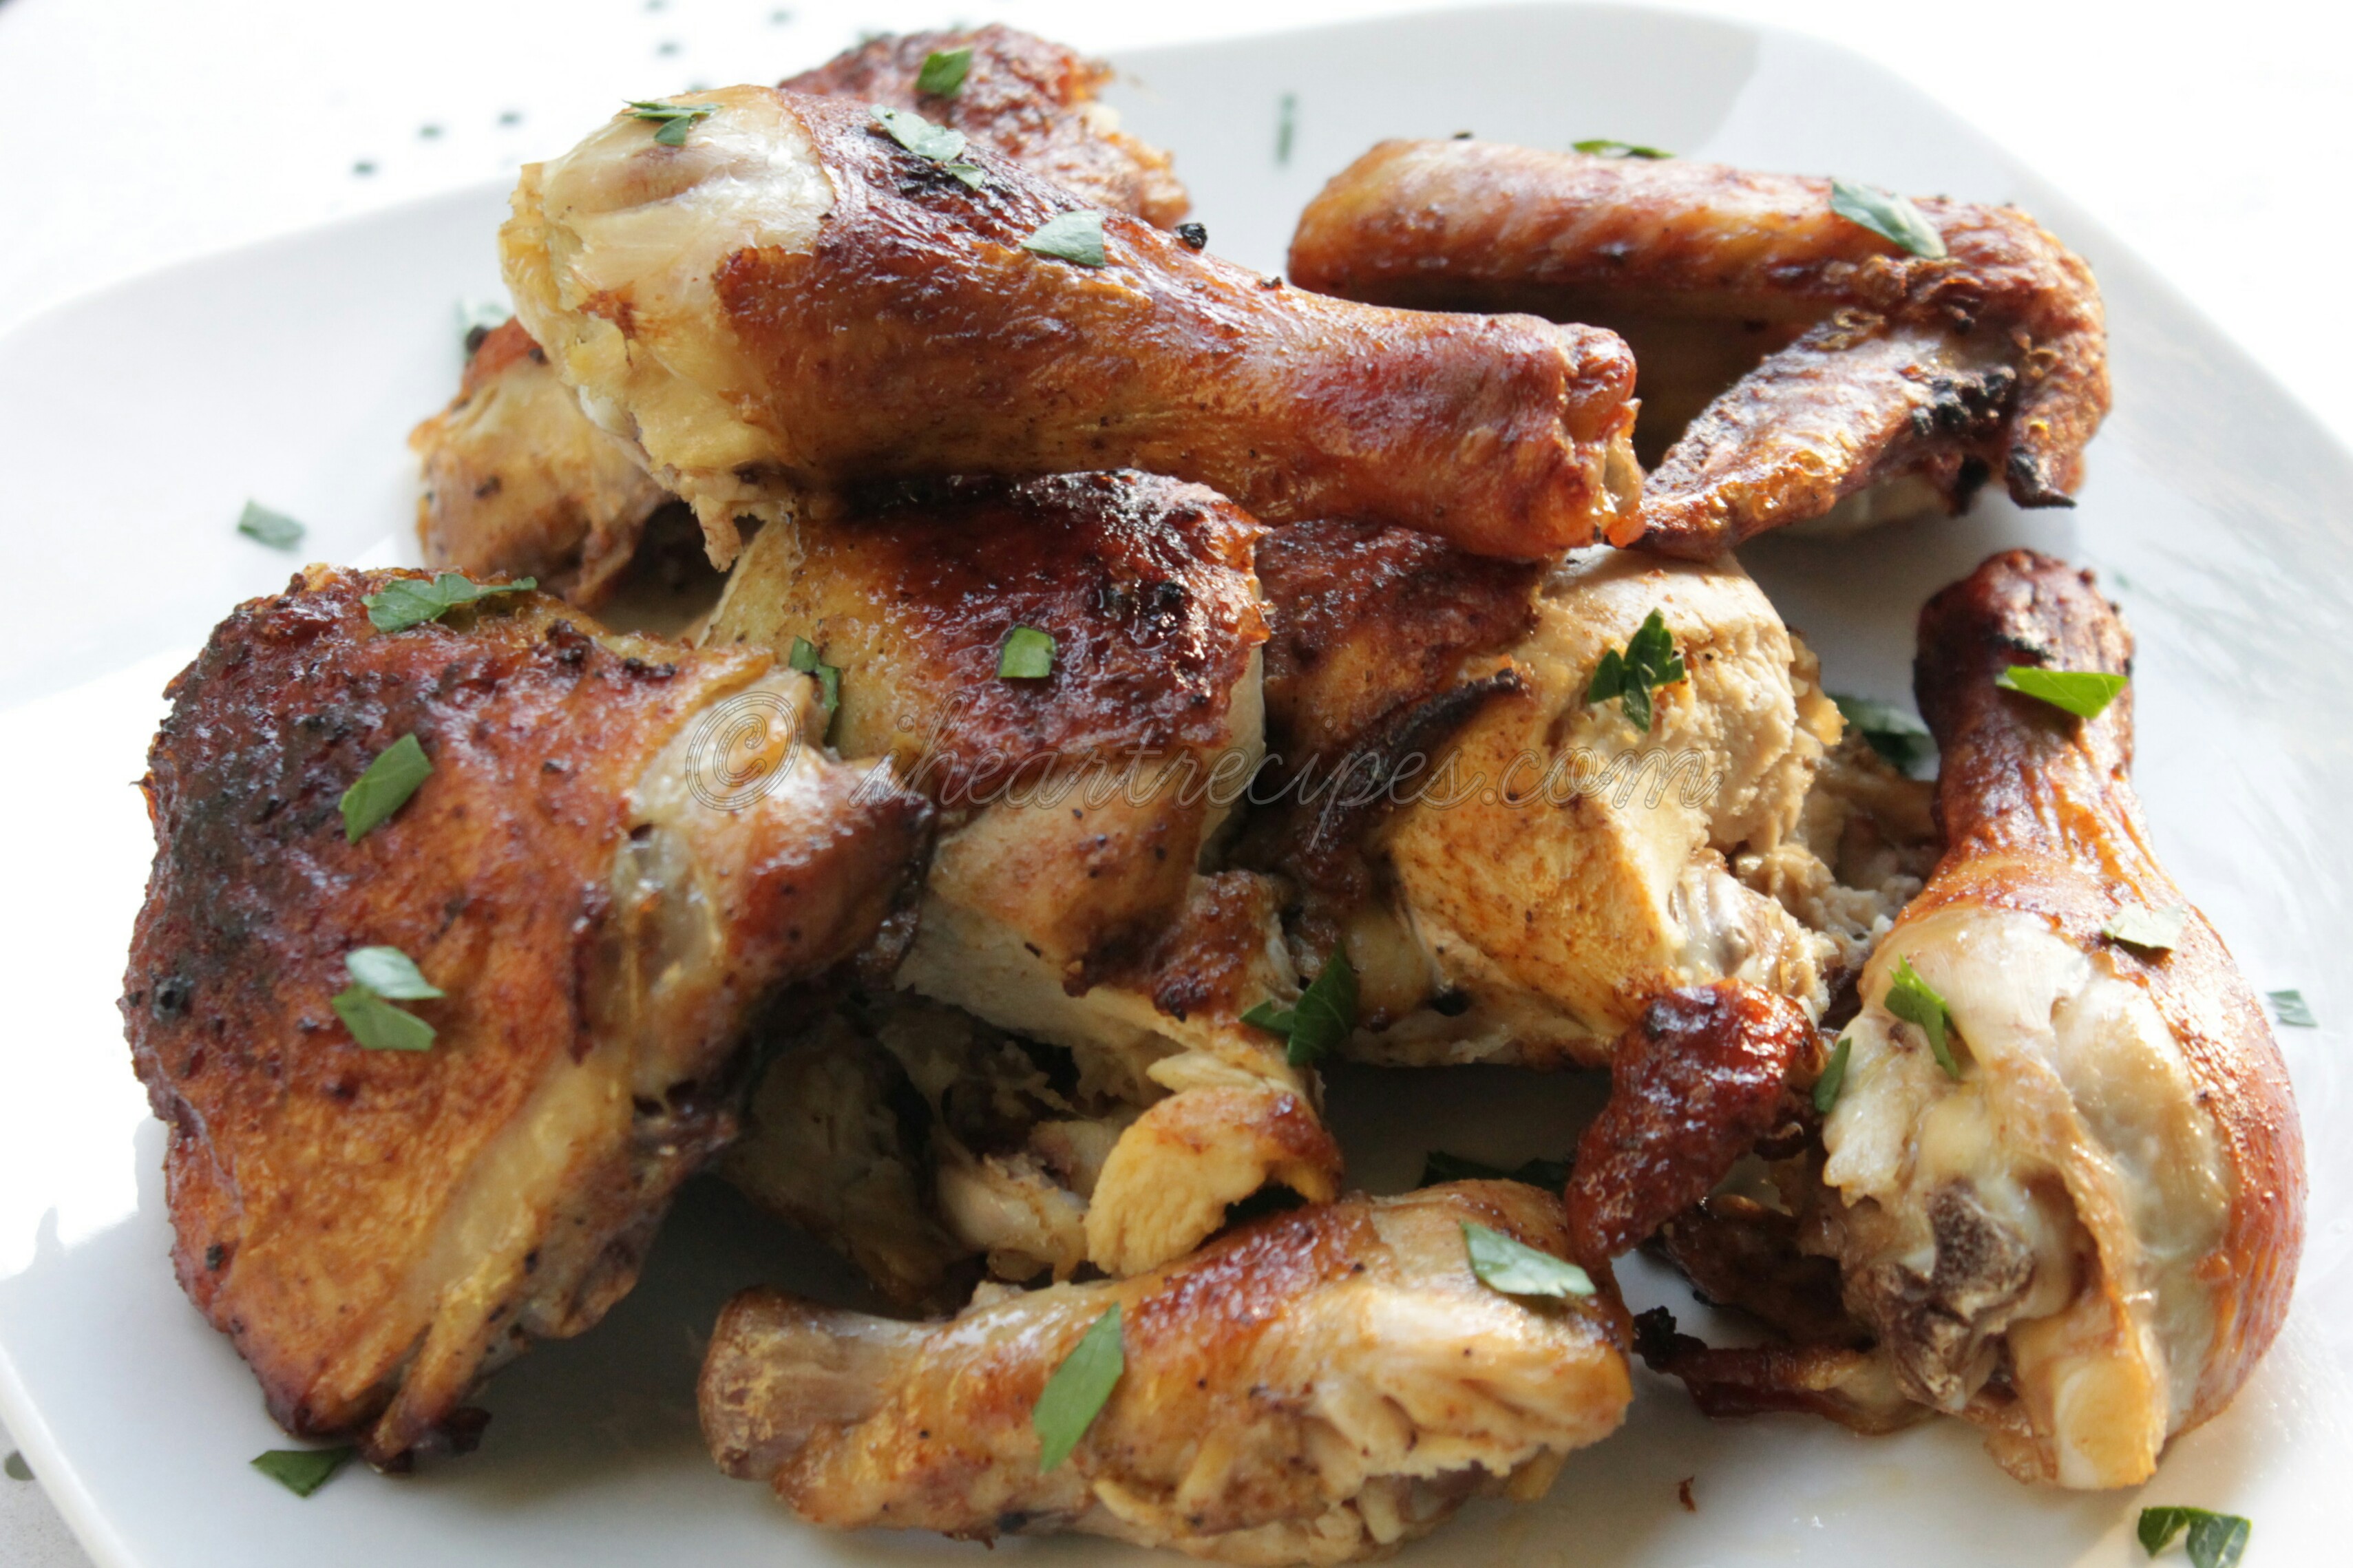 Simple Roast Chicken makes a great family meal.